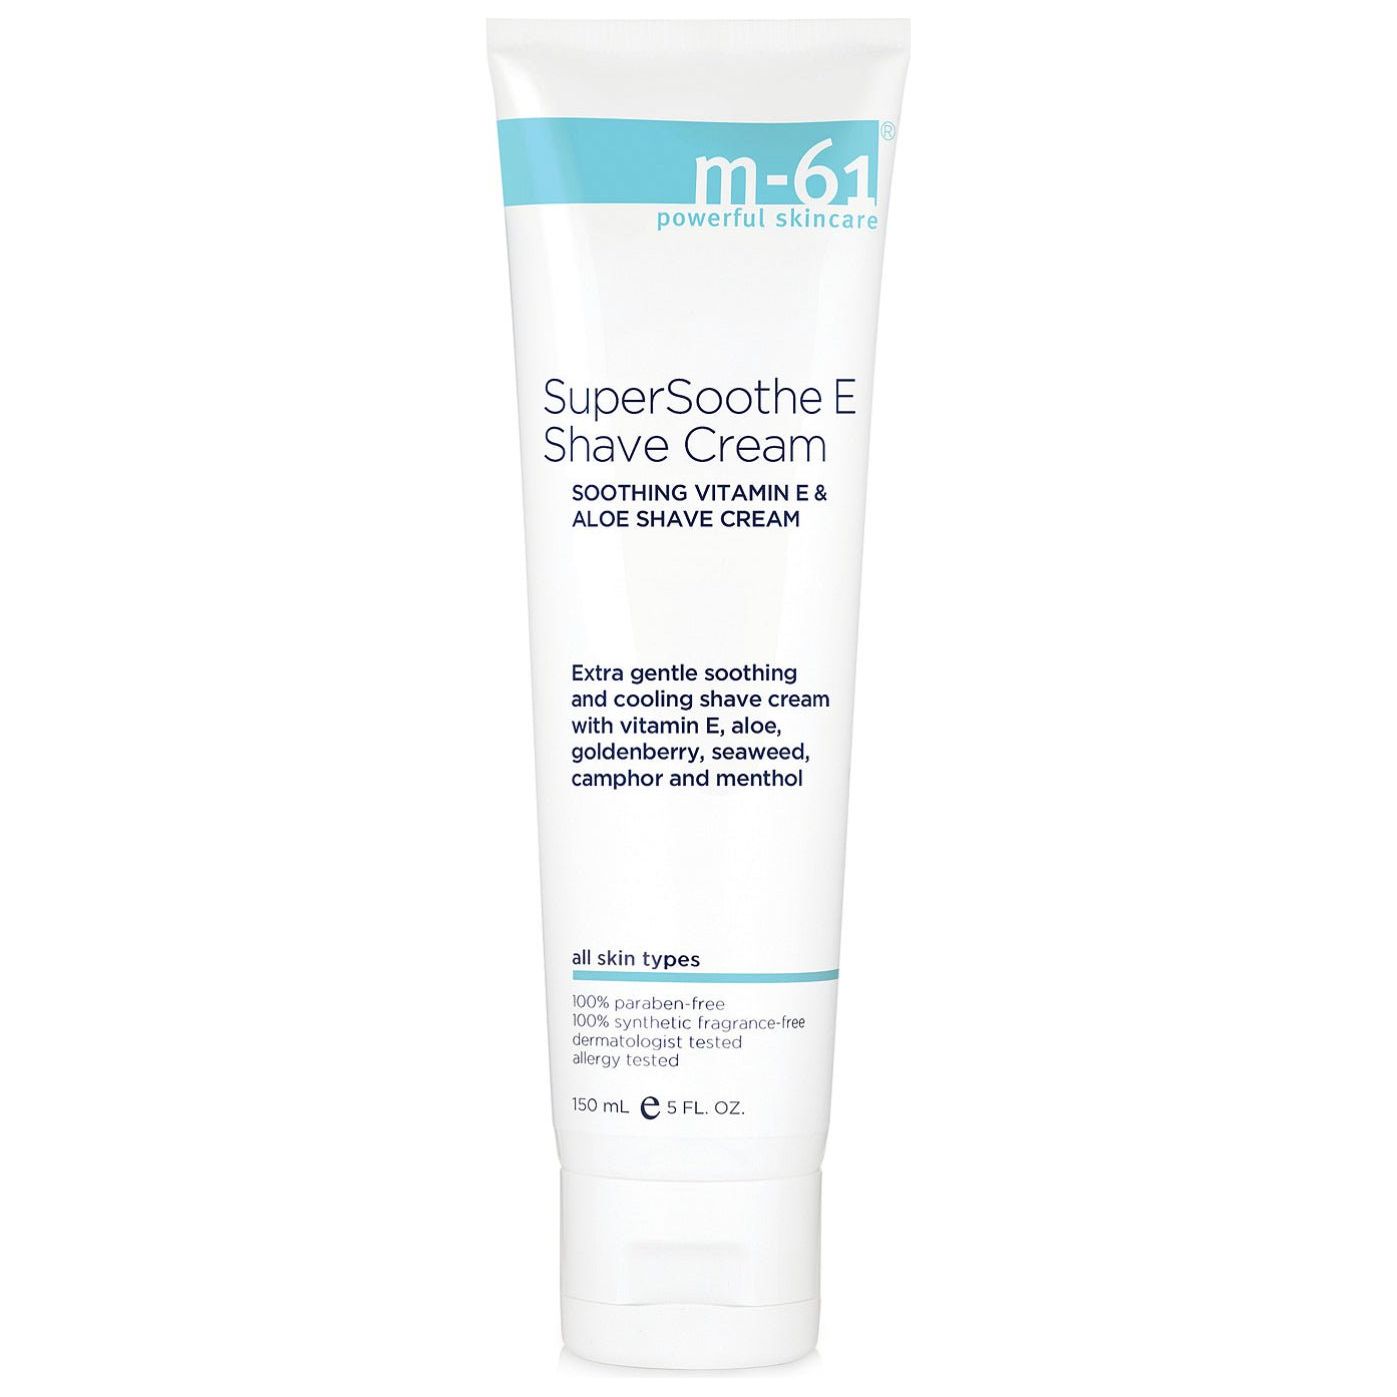 m-61 by Bluemercury SuperSoothe E Shave Cream, 5 oz (147mL) - Brandat Outlet